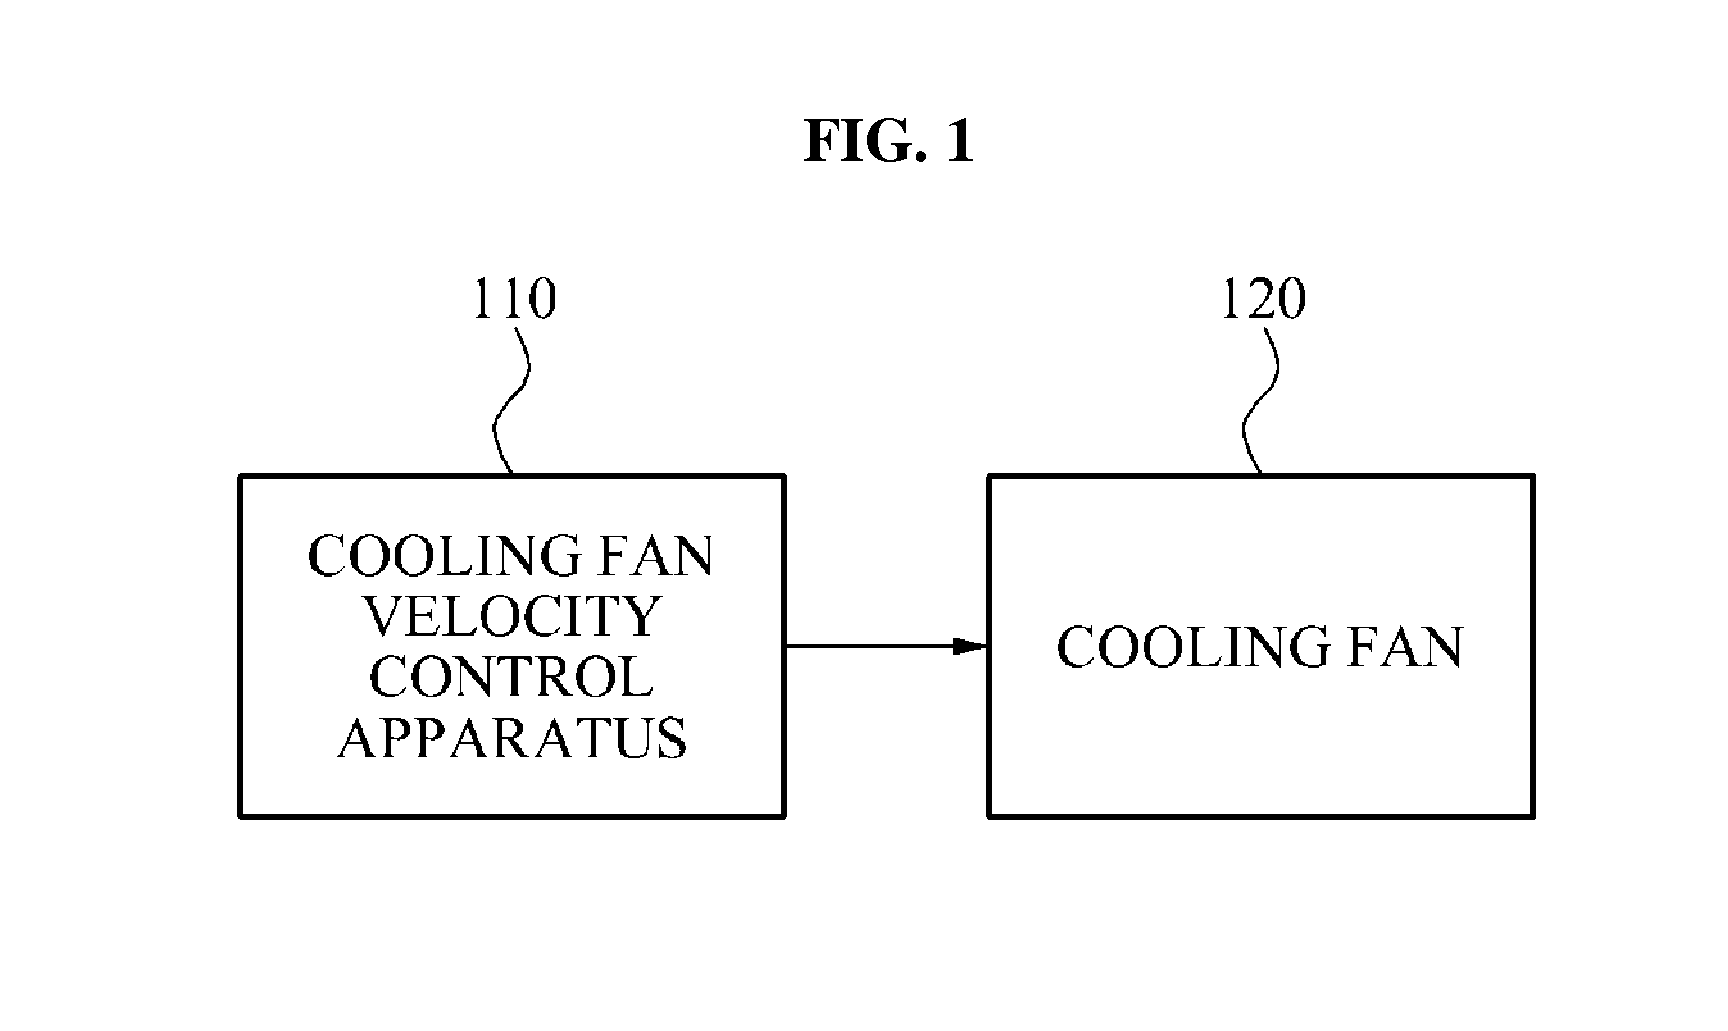 Cooling Fan Velocity Control Apparatus Using Timer and Temperature Sensor